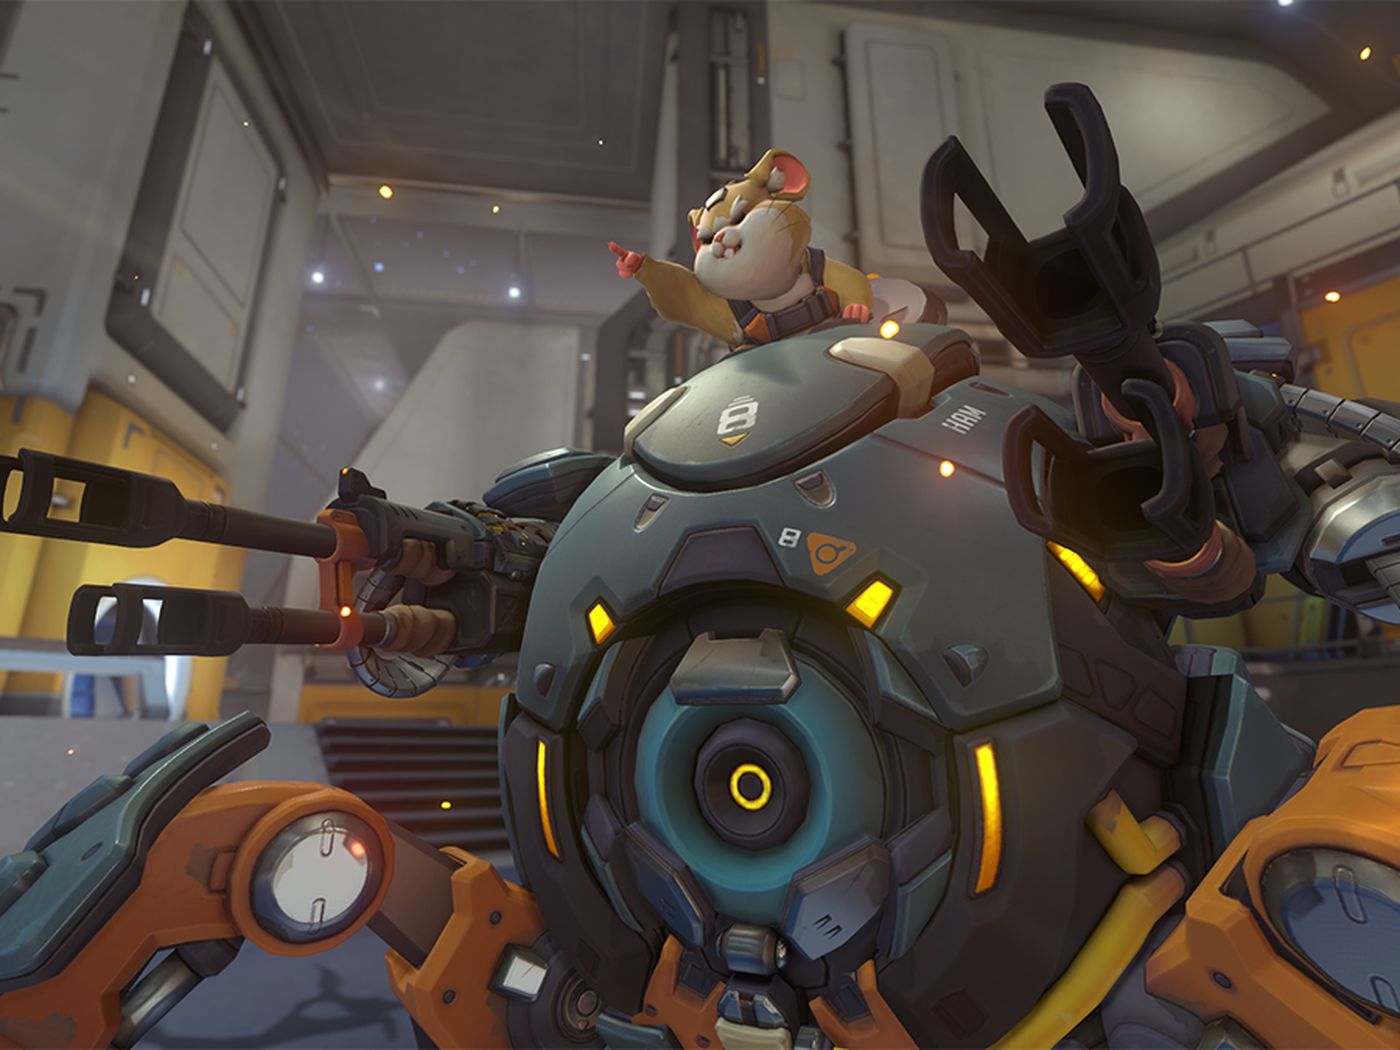 Wrecking Ball is here as Overwatch's Hero 28 and the champion of Junkertown Never Die